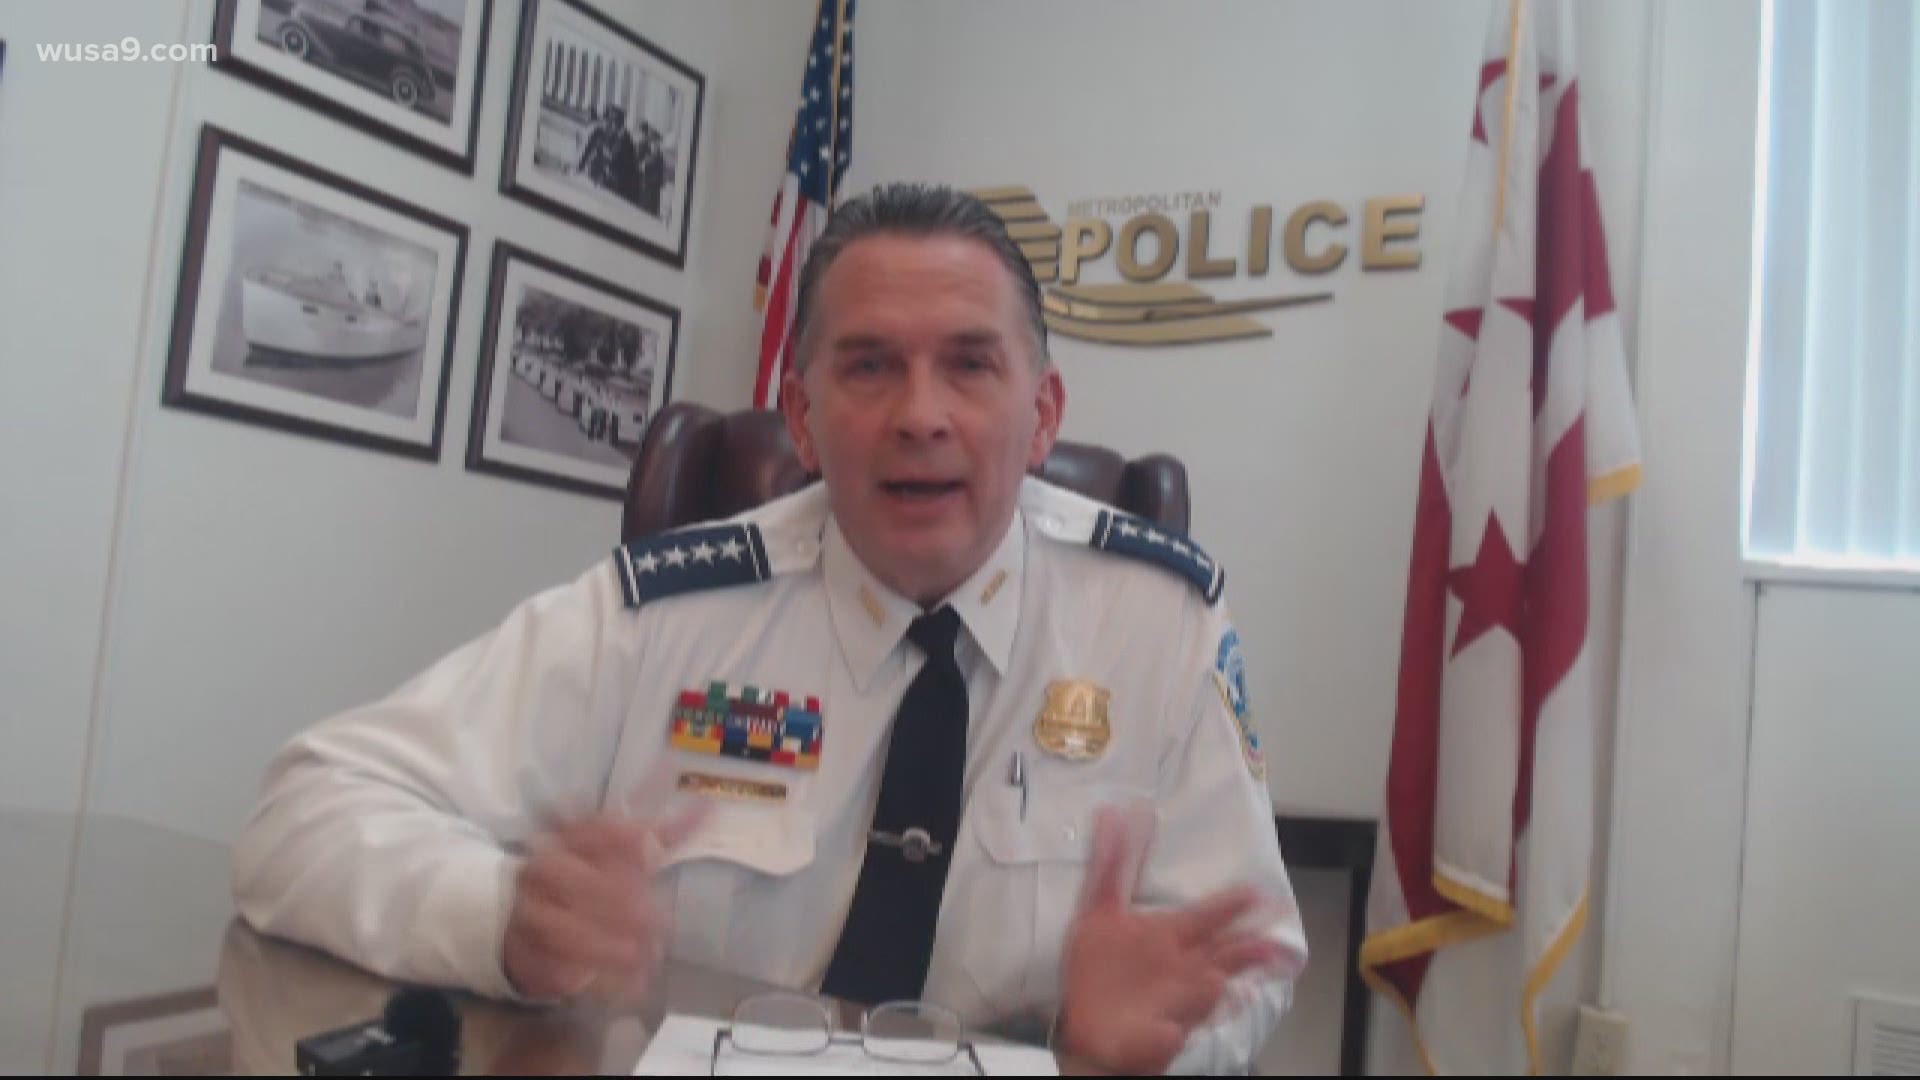 DC Police Chief Peter Newsham is upset with the DC Council for passing police reforms without consulting him, the Union or the public